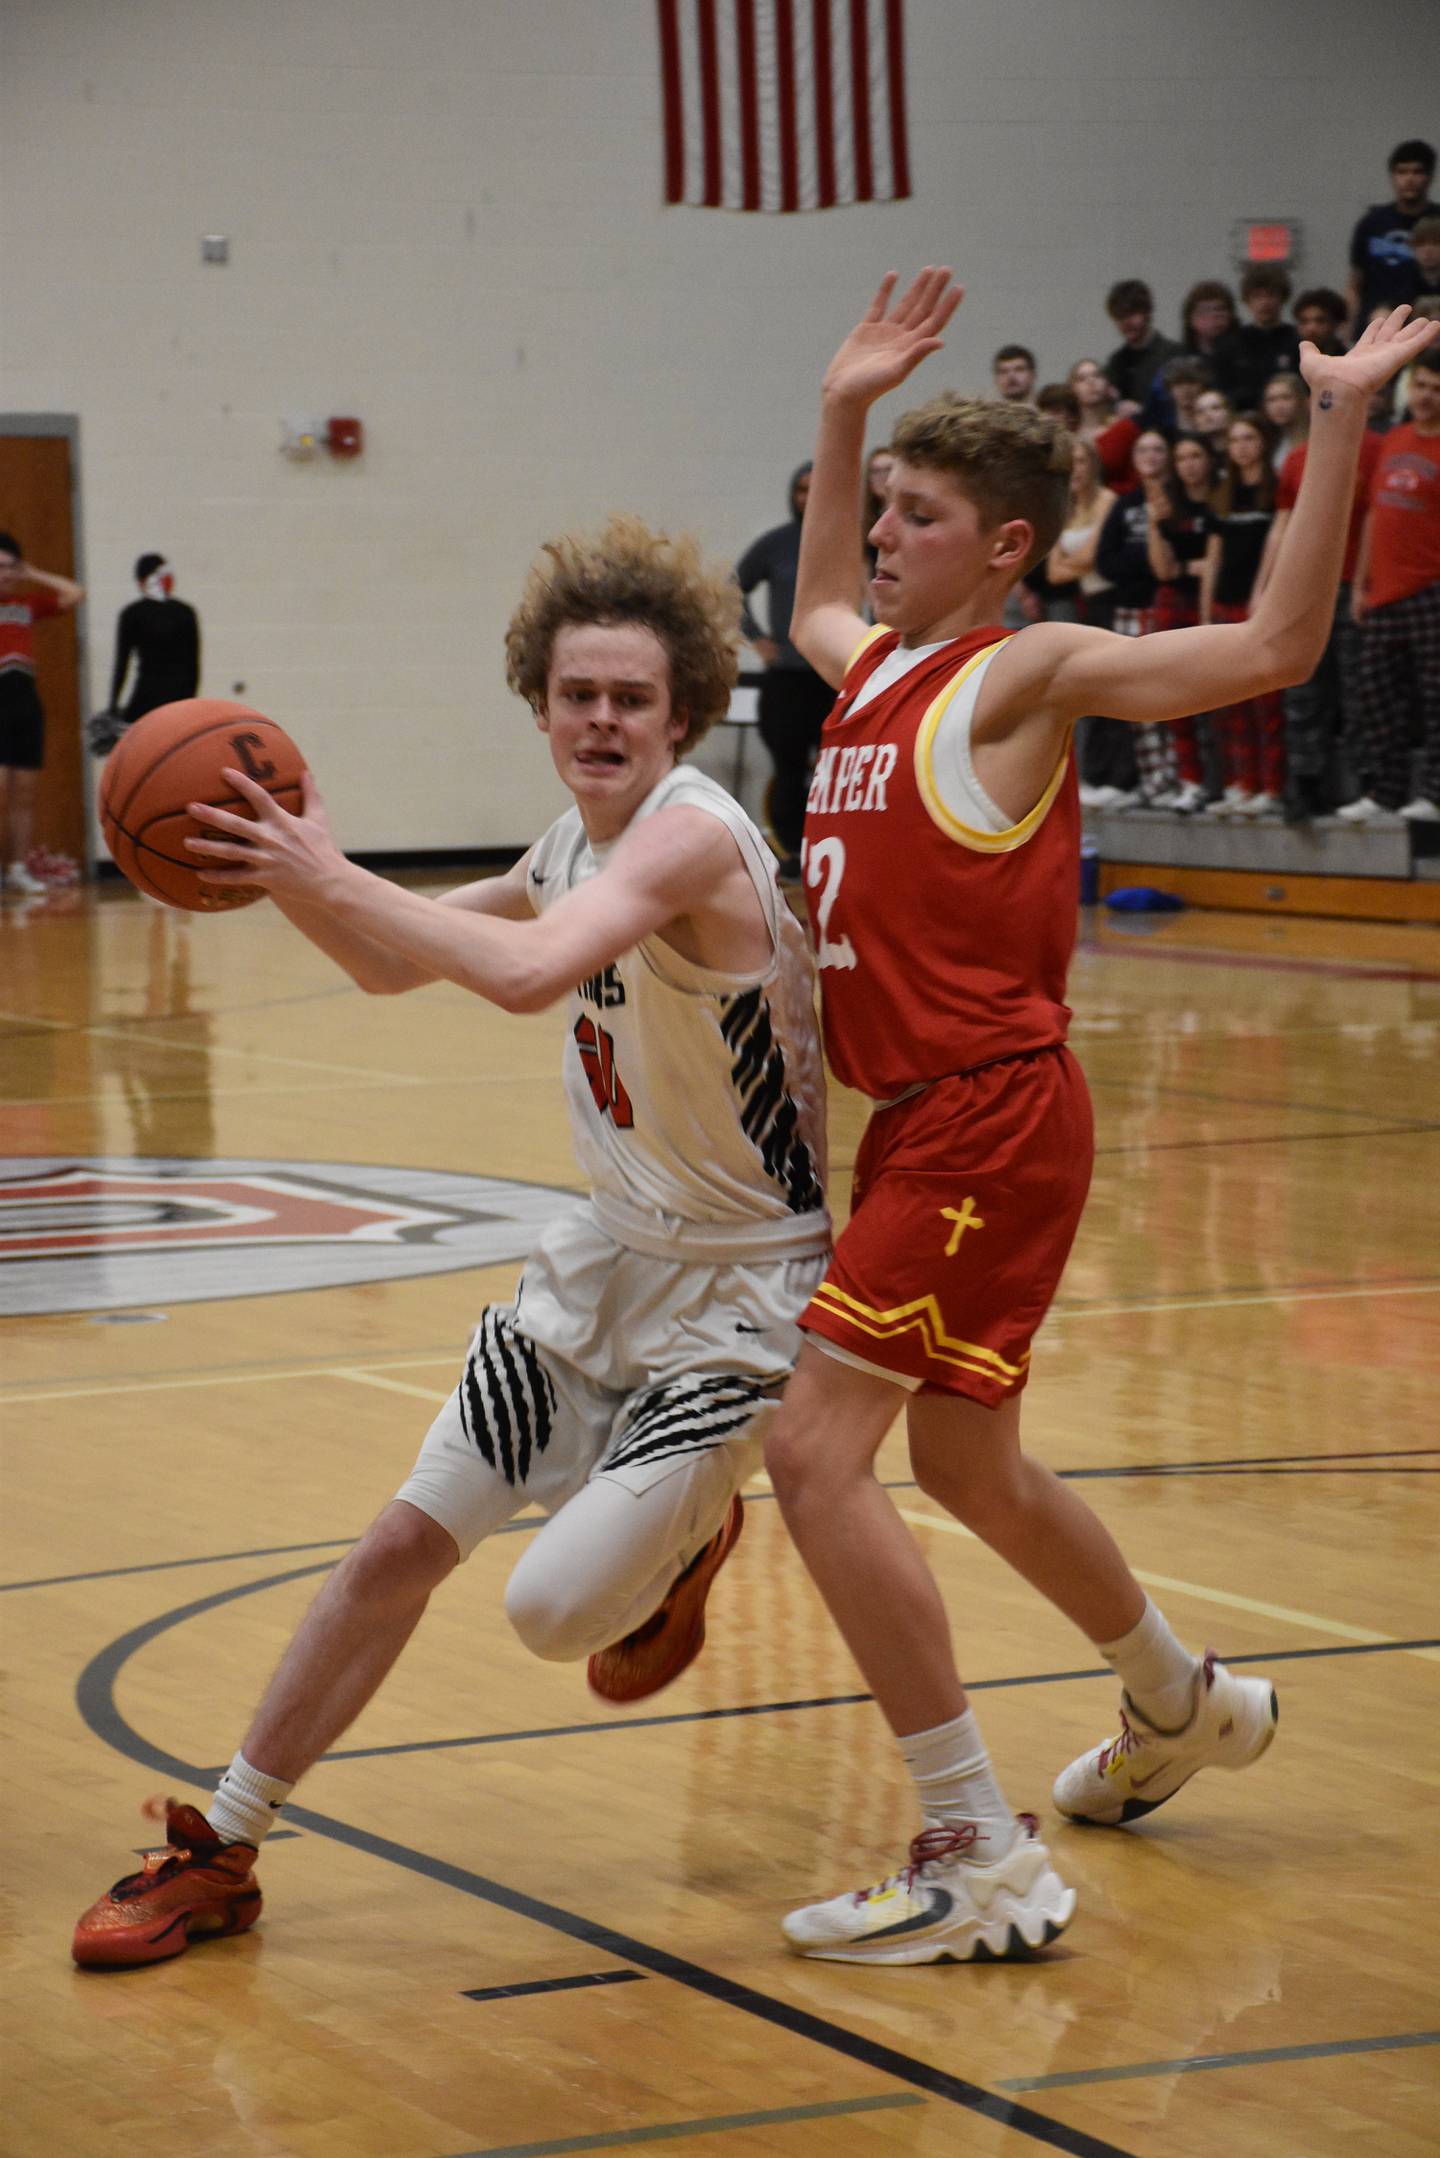 Creston's Ethan Crawford keeps himself between the ball and the Kuemper defender during Creston's loss Friday.